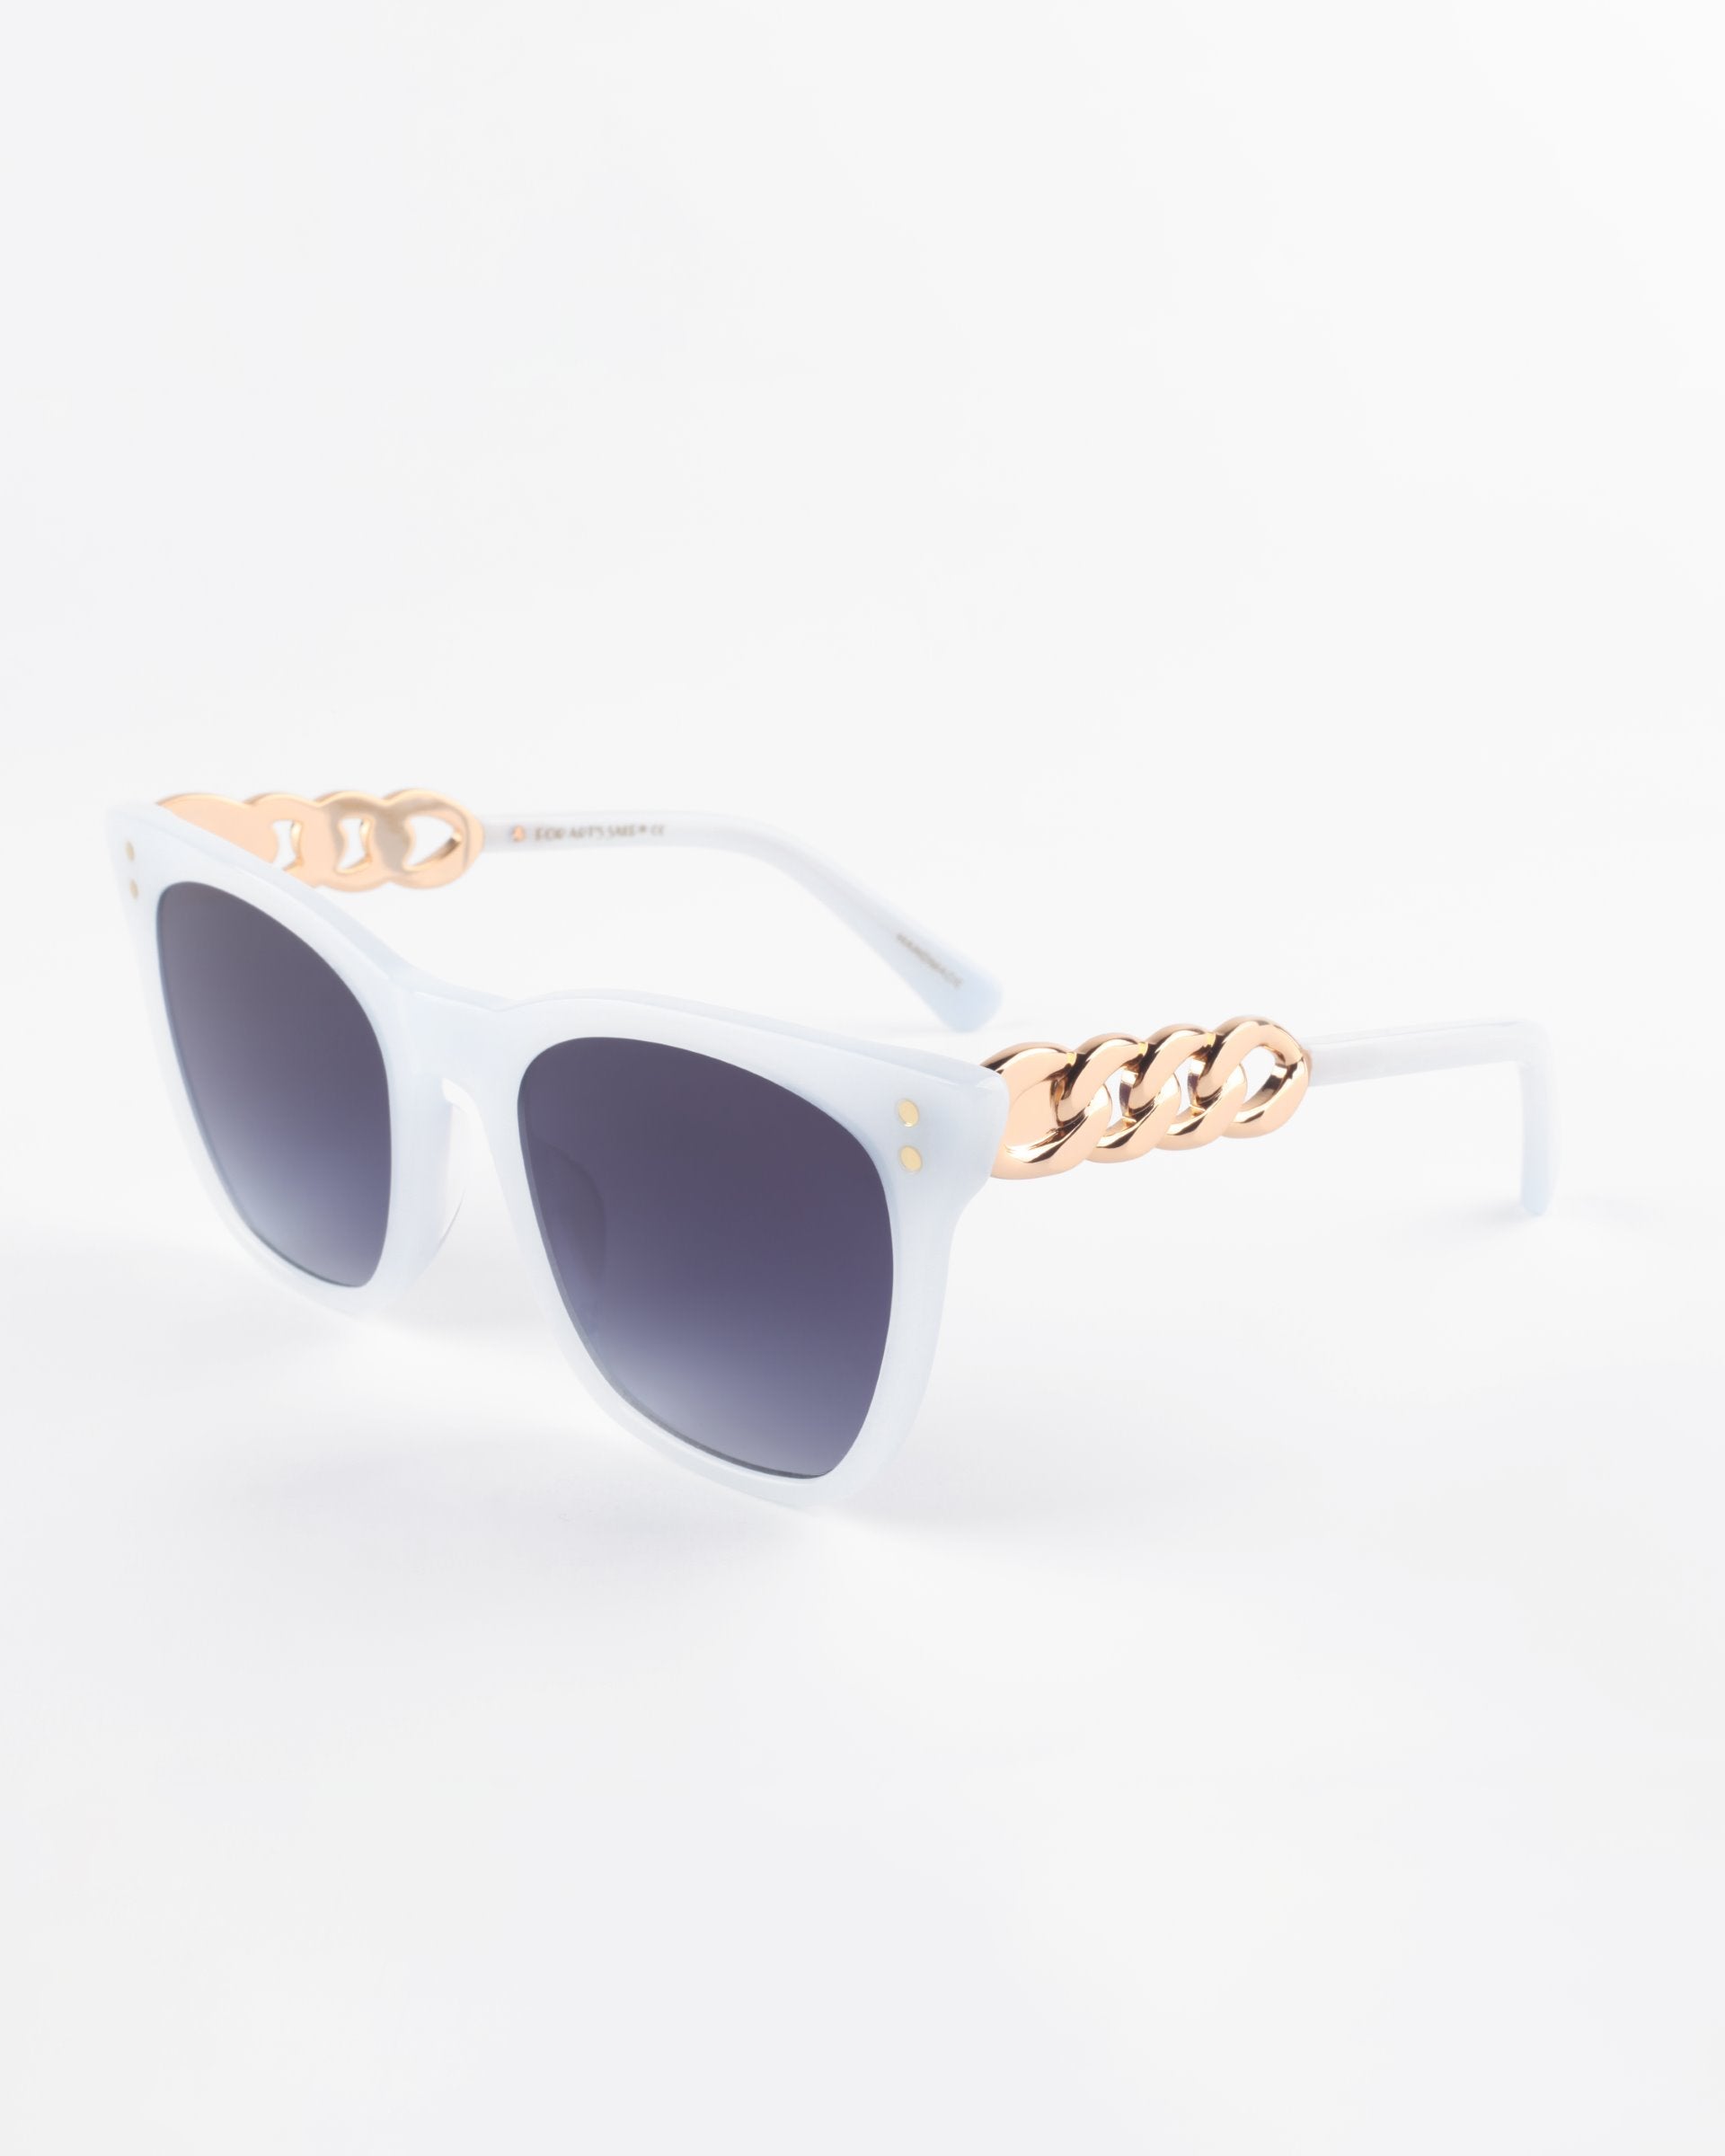 A pair of white cat-eye sunglasses with dark lenses and gold chain-link accents on the temples. The acetate frame has a glossy finish, and the Deco sunglasses by For Art's Sake® are set against a plain white background.